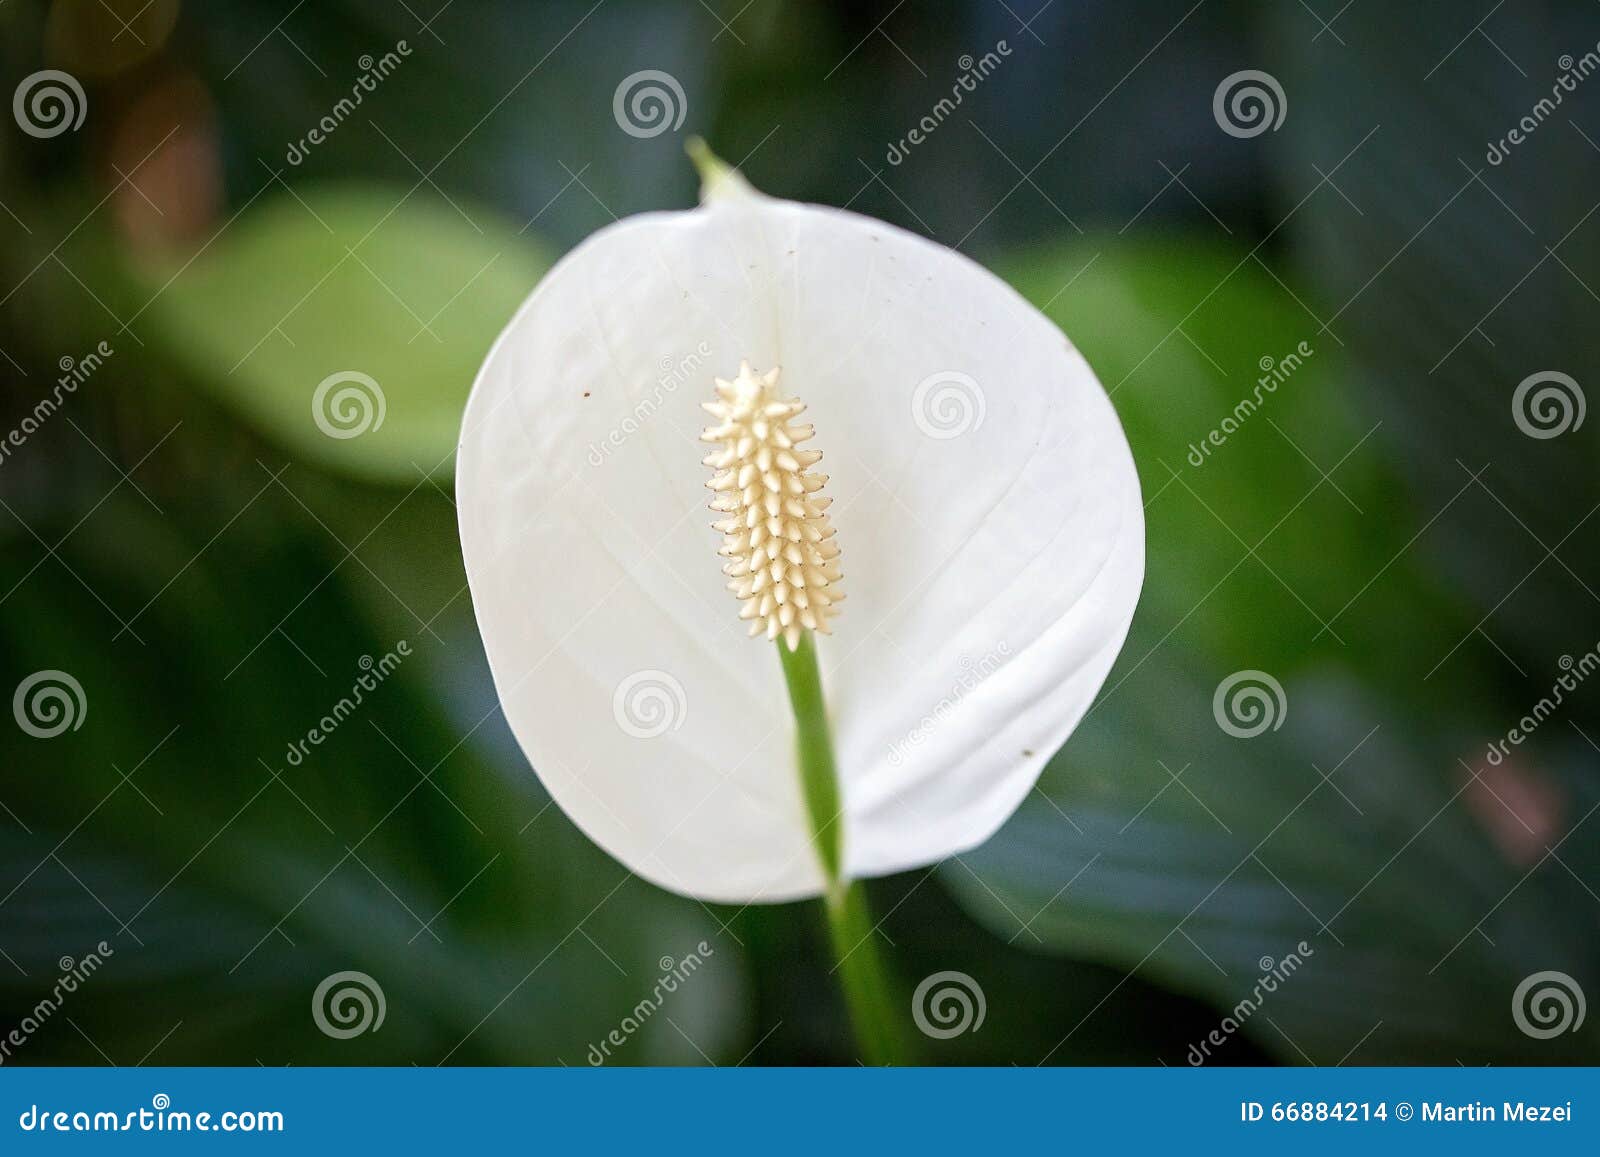 Flower (anthos, flos) stock photo. Image of pure, - 66884214